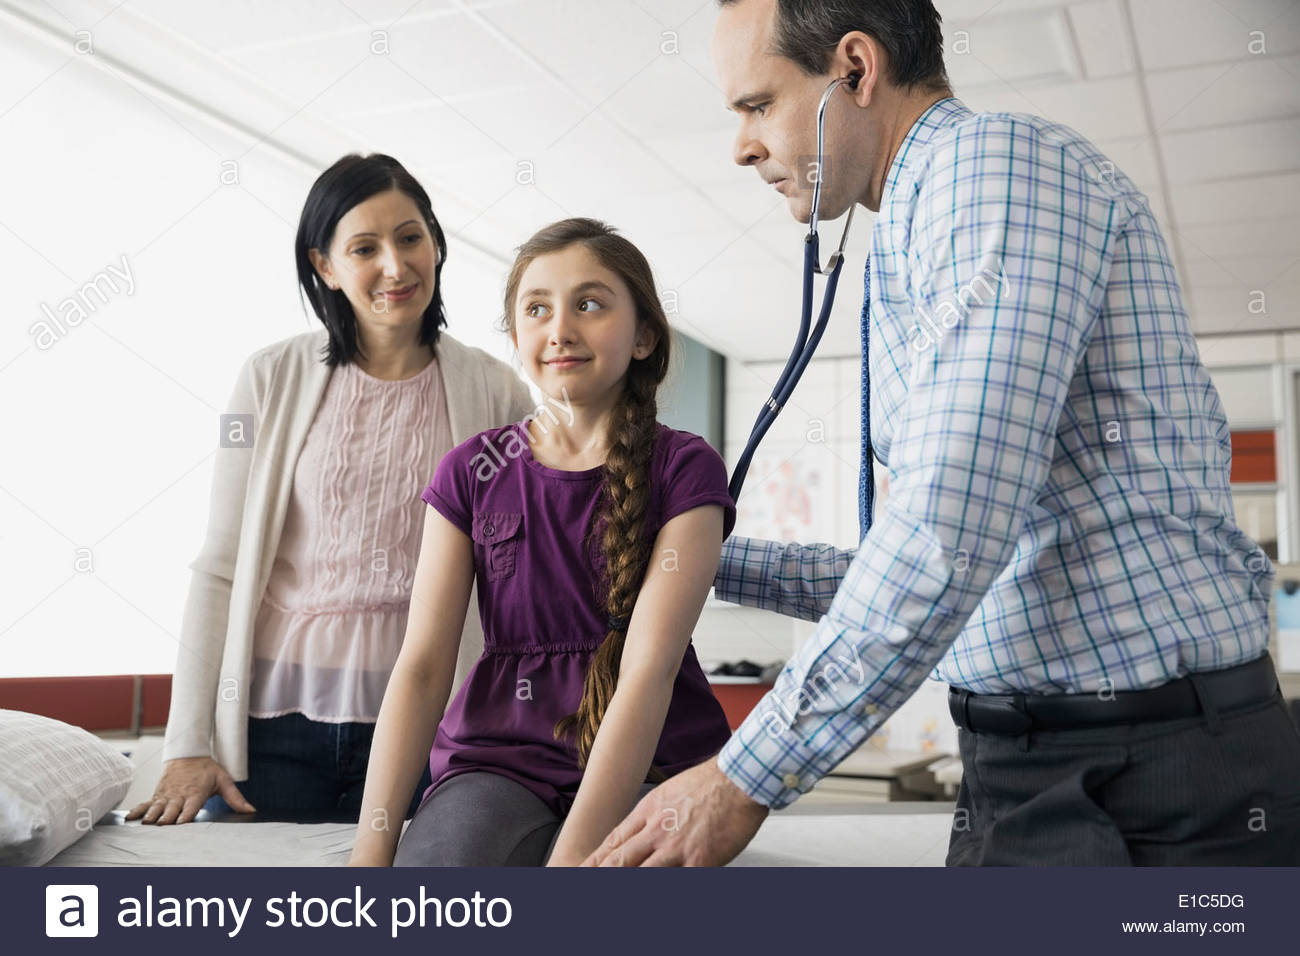 Pediatrician checking patientÕs breathing with stethoscope Stock Photo